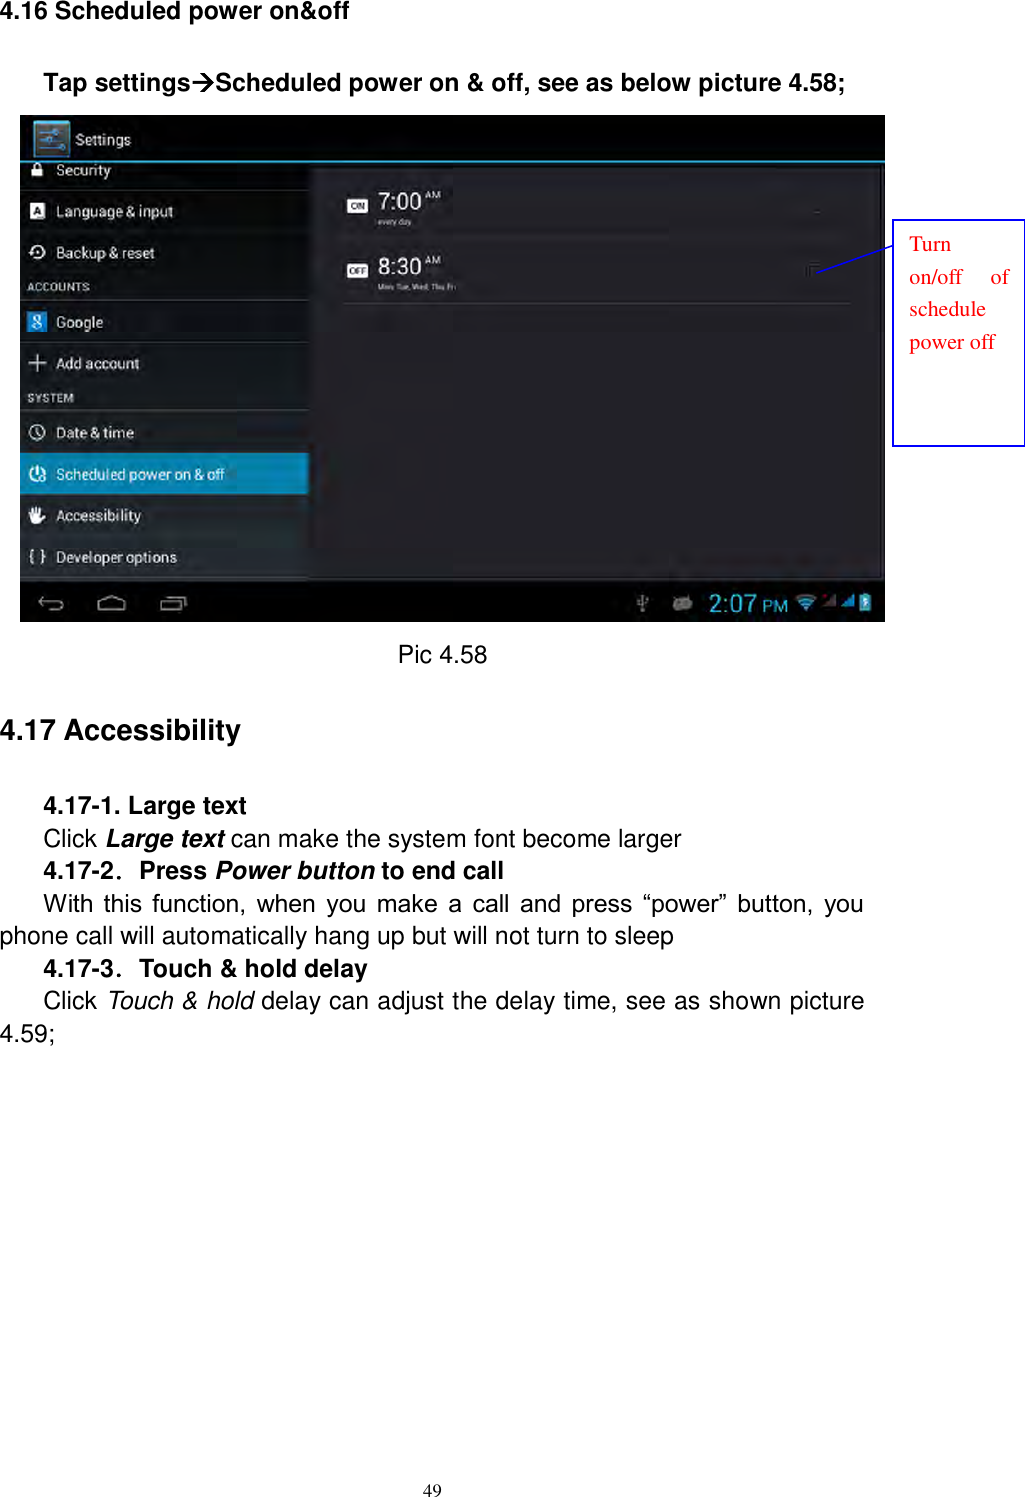      49 4.16 Scheduled power on&amp;off Tap settingsScheduled power on &amp; off, see as below picture 4.58;  Pic 4.58 4.17 Accessibility 4.17-1. Large text Click Large text can make the system font become larger 4.17-2．Press Power button to end call With  this  function,  when  you  make  a  call  and  press  “power”  button,  you phone call will automatically hang up but will not turn to sleep 4.17-3．Touch &amp; hold delay Click Touch &amp; hold delay can adjust the delay time, see as shown picture 4.59; Turn on/off  of schedule power off 